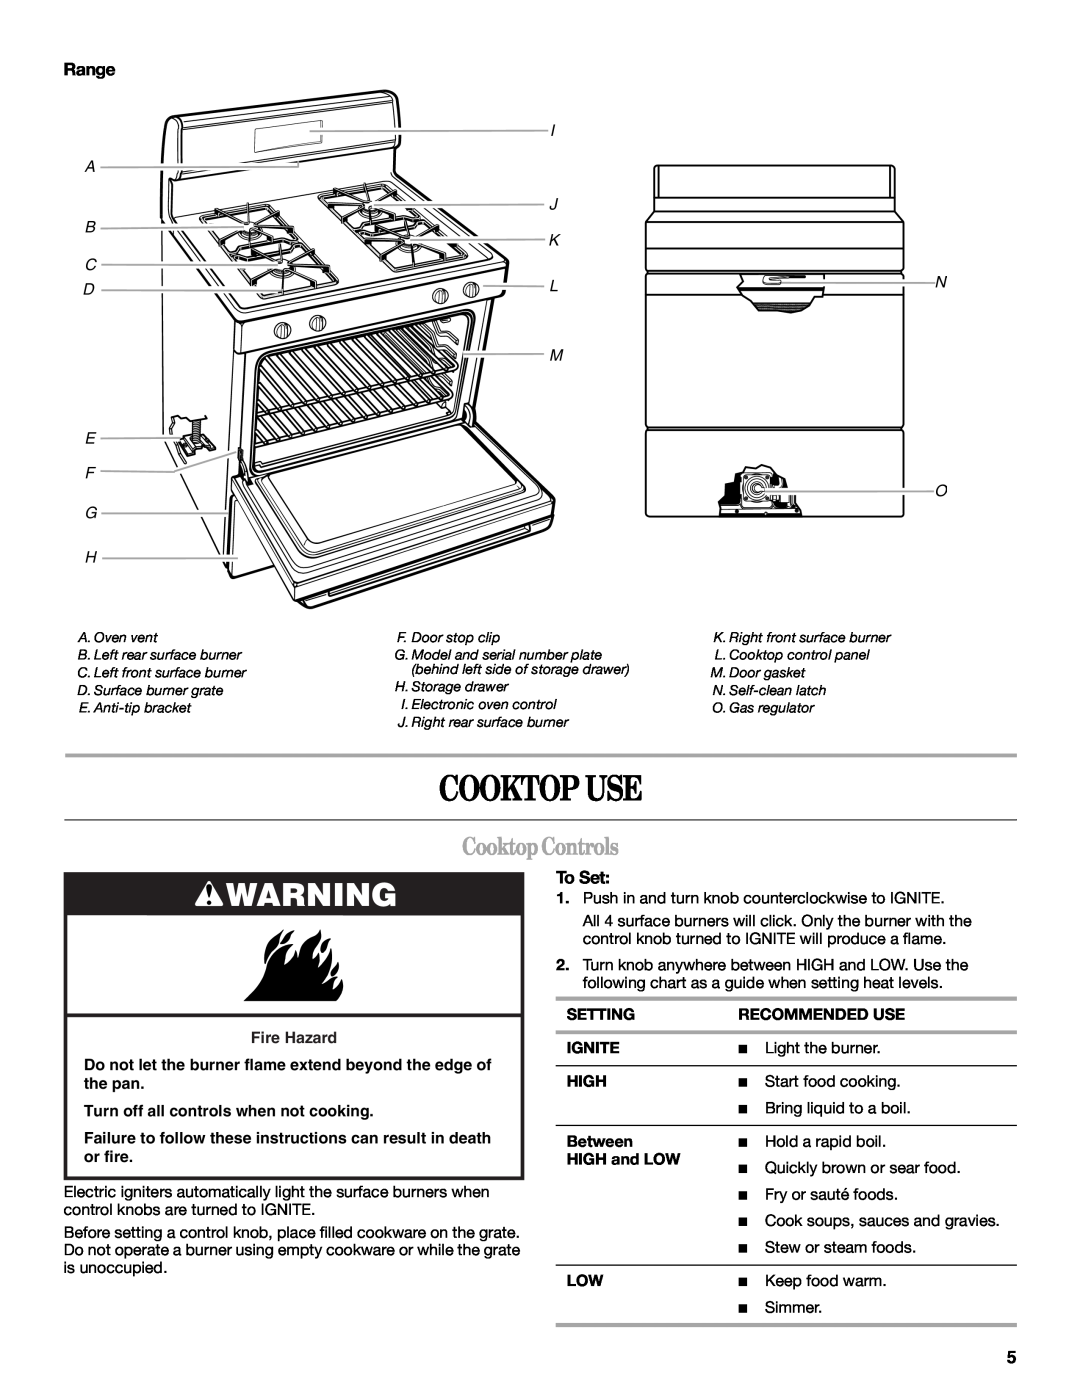 Whirlpool IGS325RQ1 Cooktop Use, Cooktop Controls, Range, To Set, Fire Hazard, Turn off all controls when not cooking 